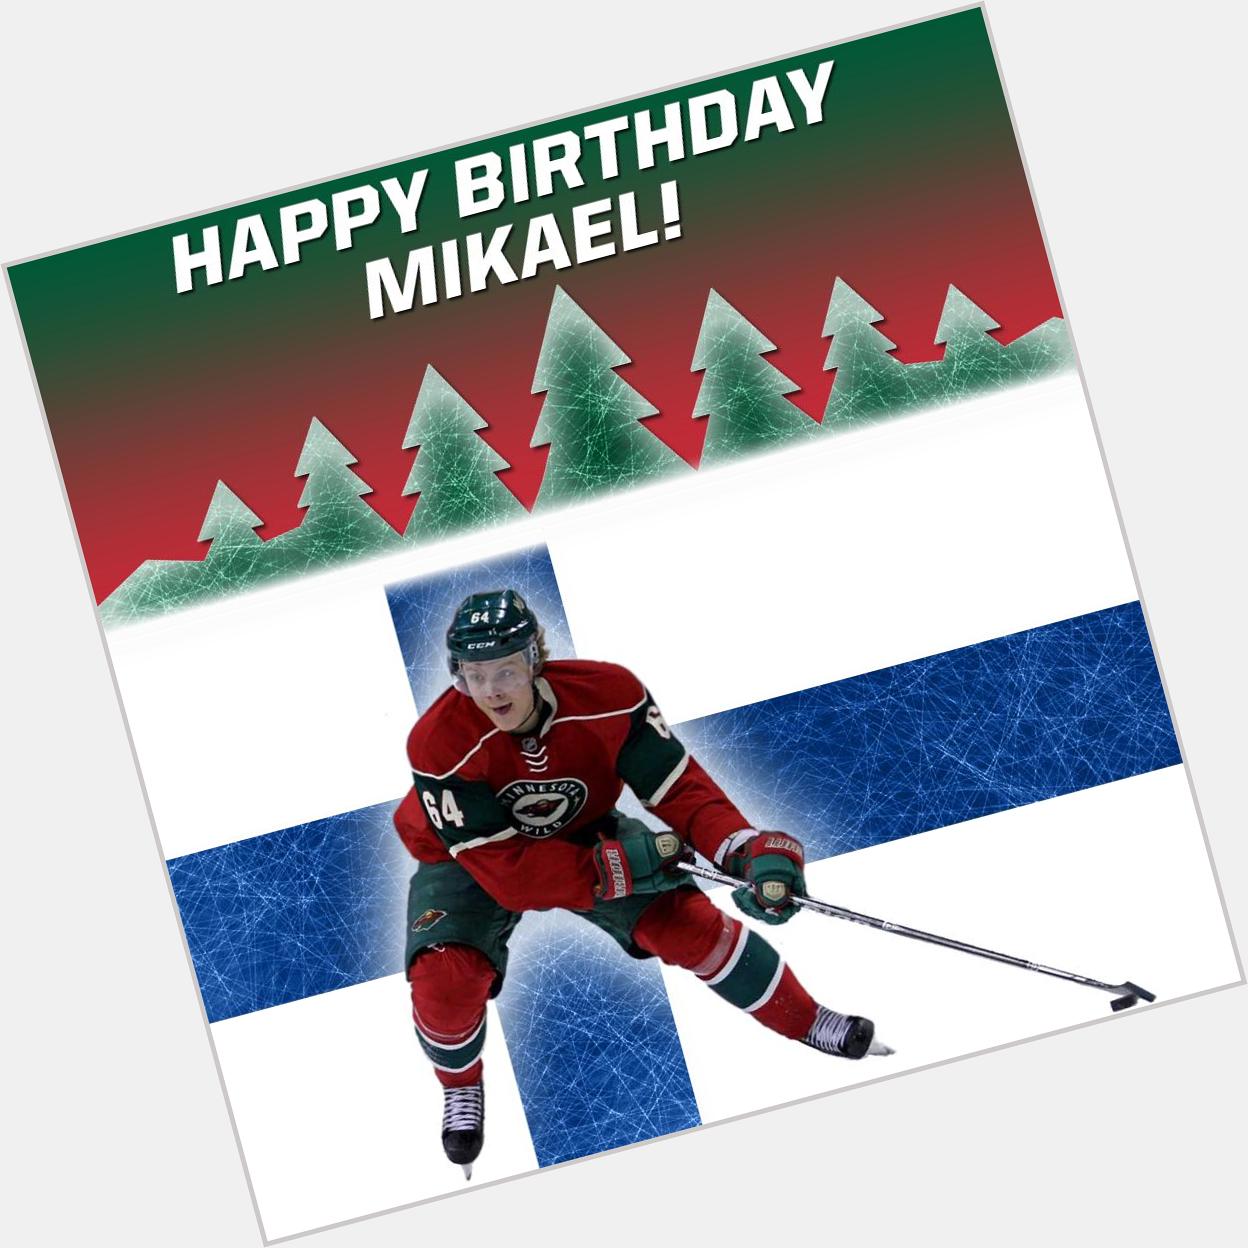 Happy birthday 2 Mikael Granlund of the We hope a W 2night will give u another reason 2 celebrate! 